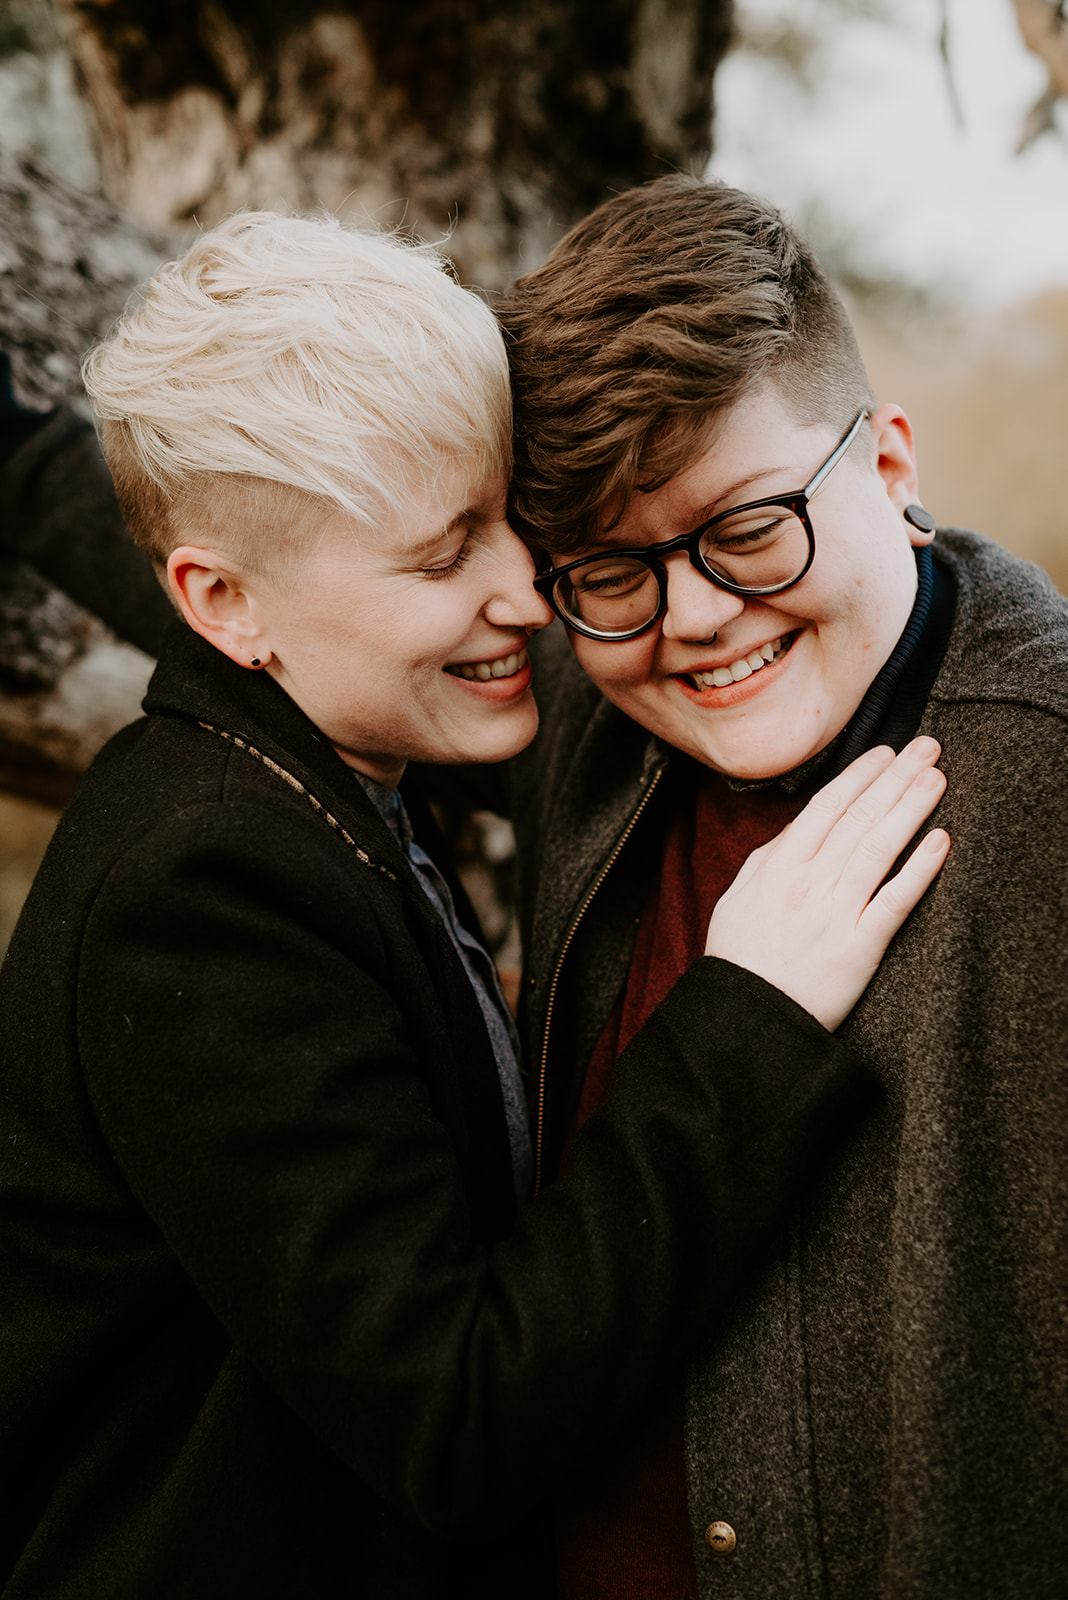 queer and trans photographer Liv Lyszyk Phohotography engagement session at The Highlands in Grand Rapids Michigan LGBTQ 